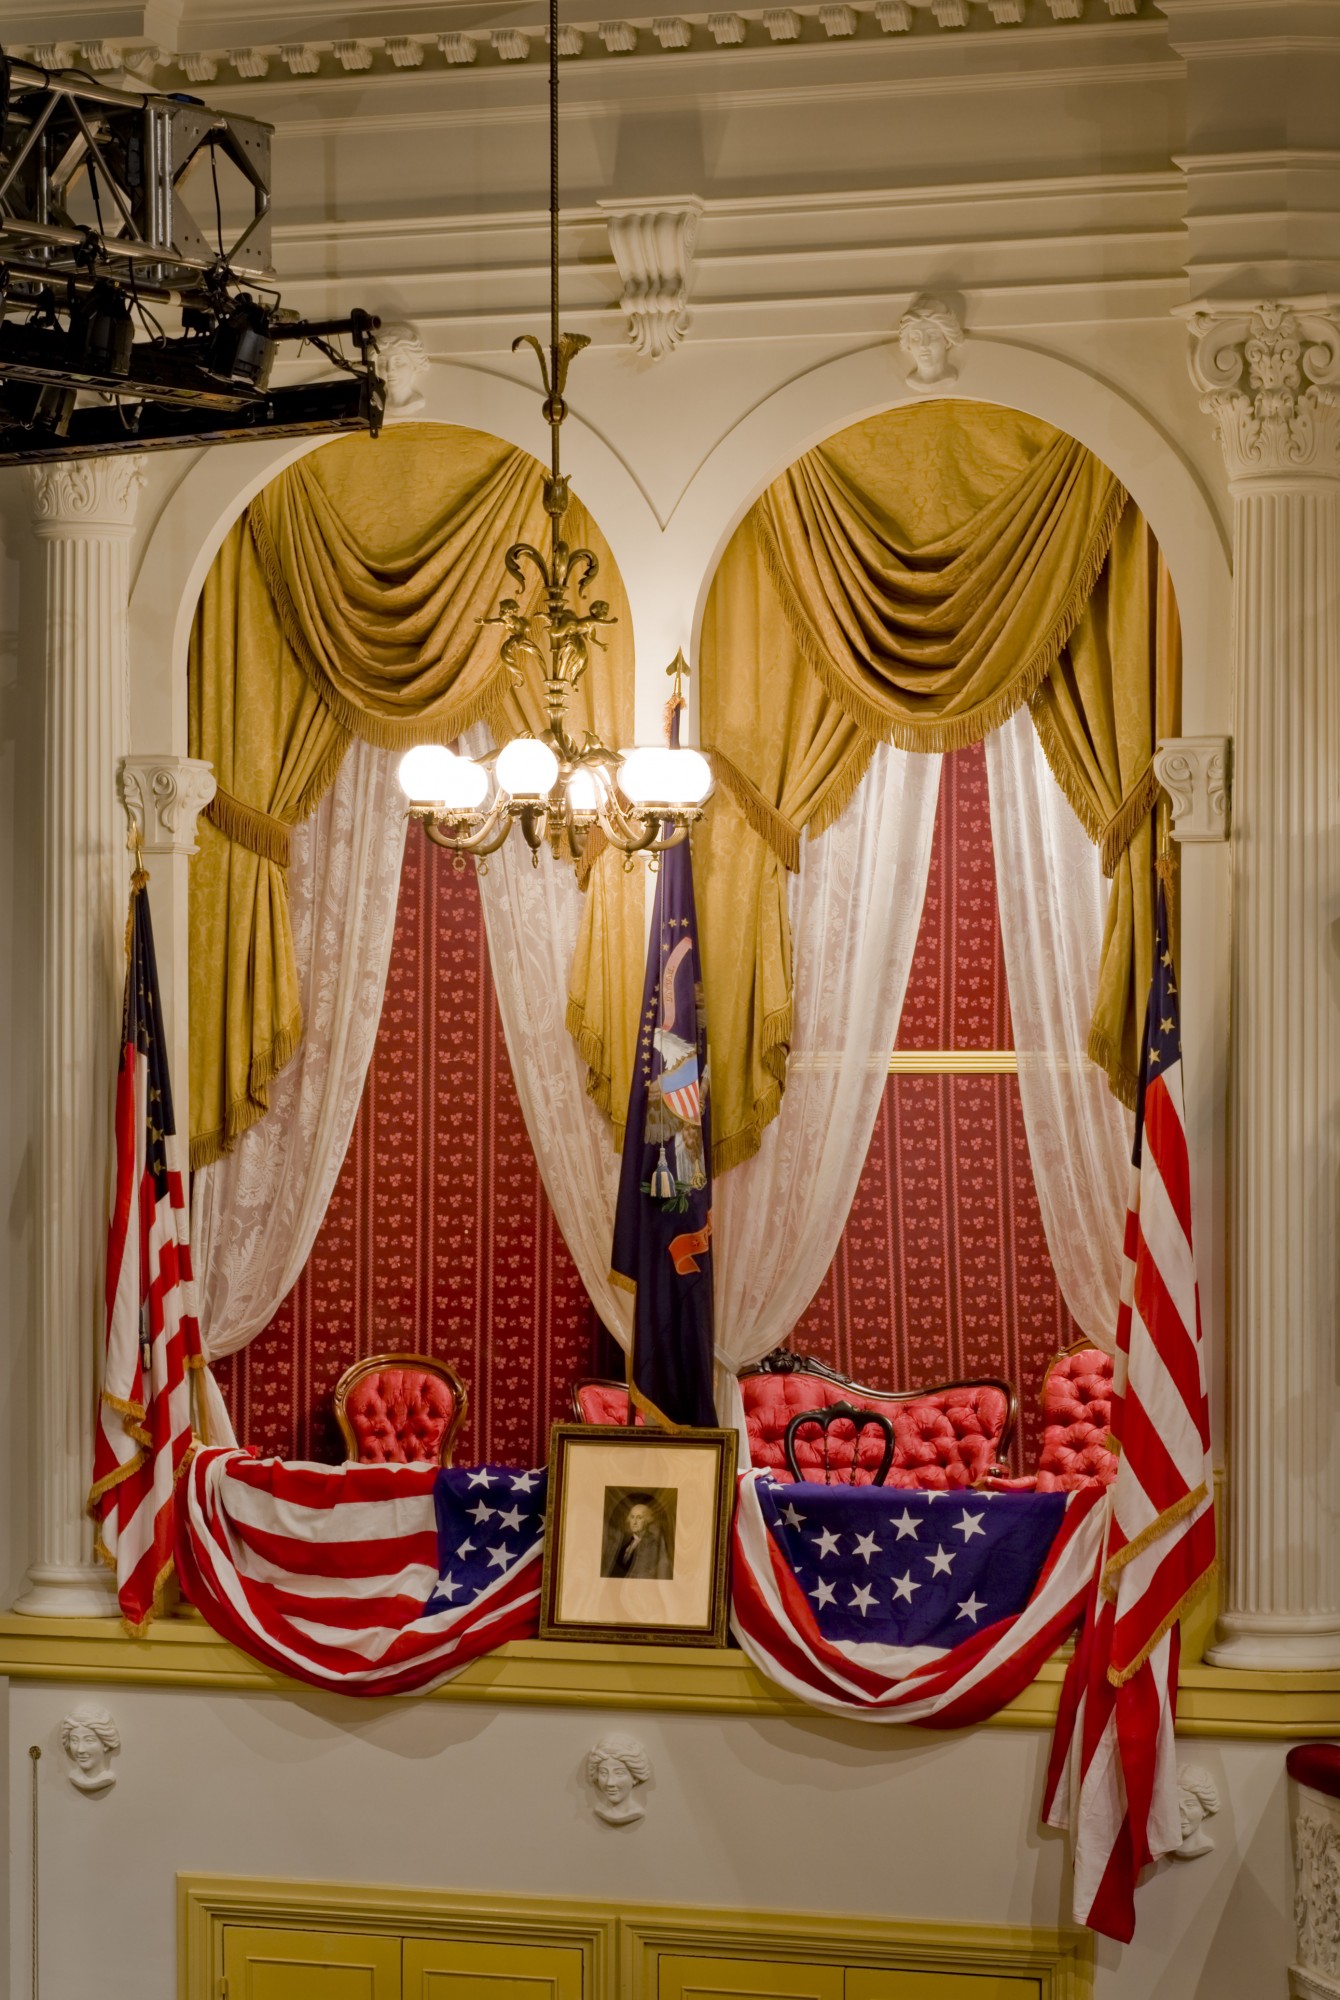 Color photo (from 2009) shows a close up of the Presidential Box at Ford's Theatre. The white balcony is adorned with American flags, large yellow curtains with fringe and furniture of the 1860s style. It is dressed to appear like it looked the night of the 1865 Lincoln assassination.